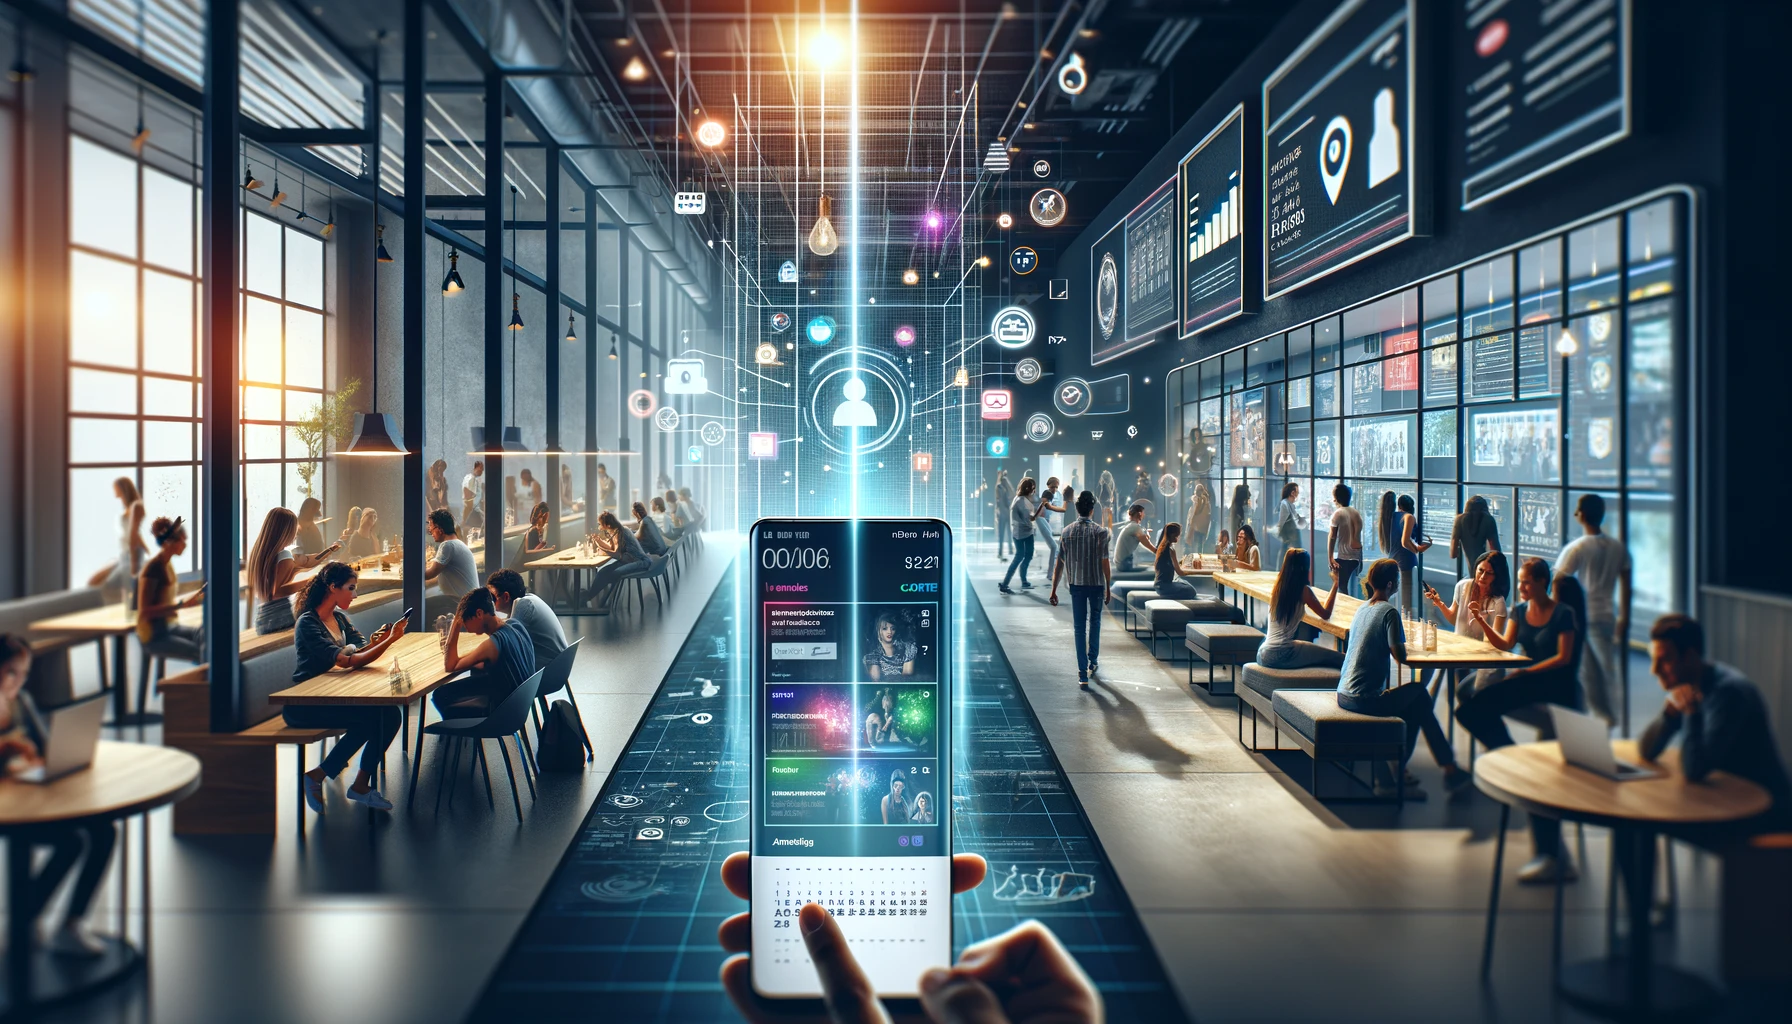 A futuristic scene of CETV advertising in a sleek commercial environment with digital displays, people interacting, and a smartphone displaying a calendar app connected by animated lines.